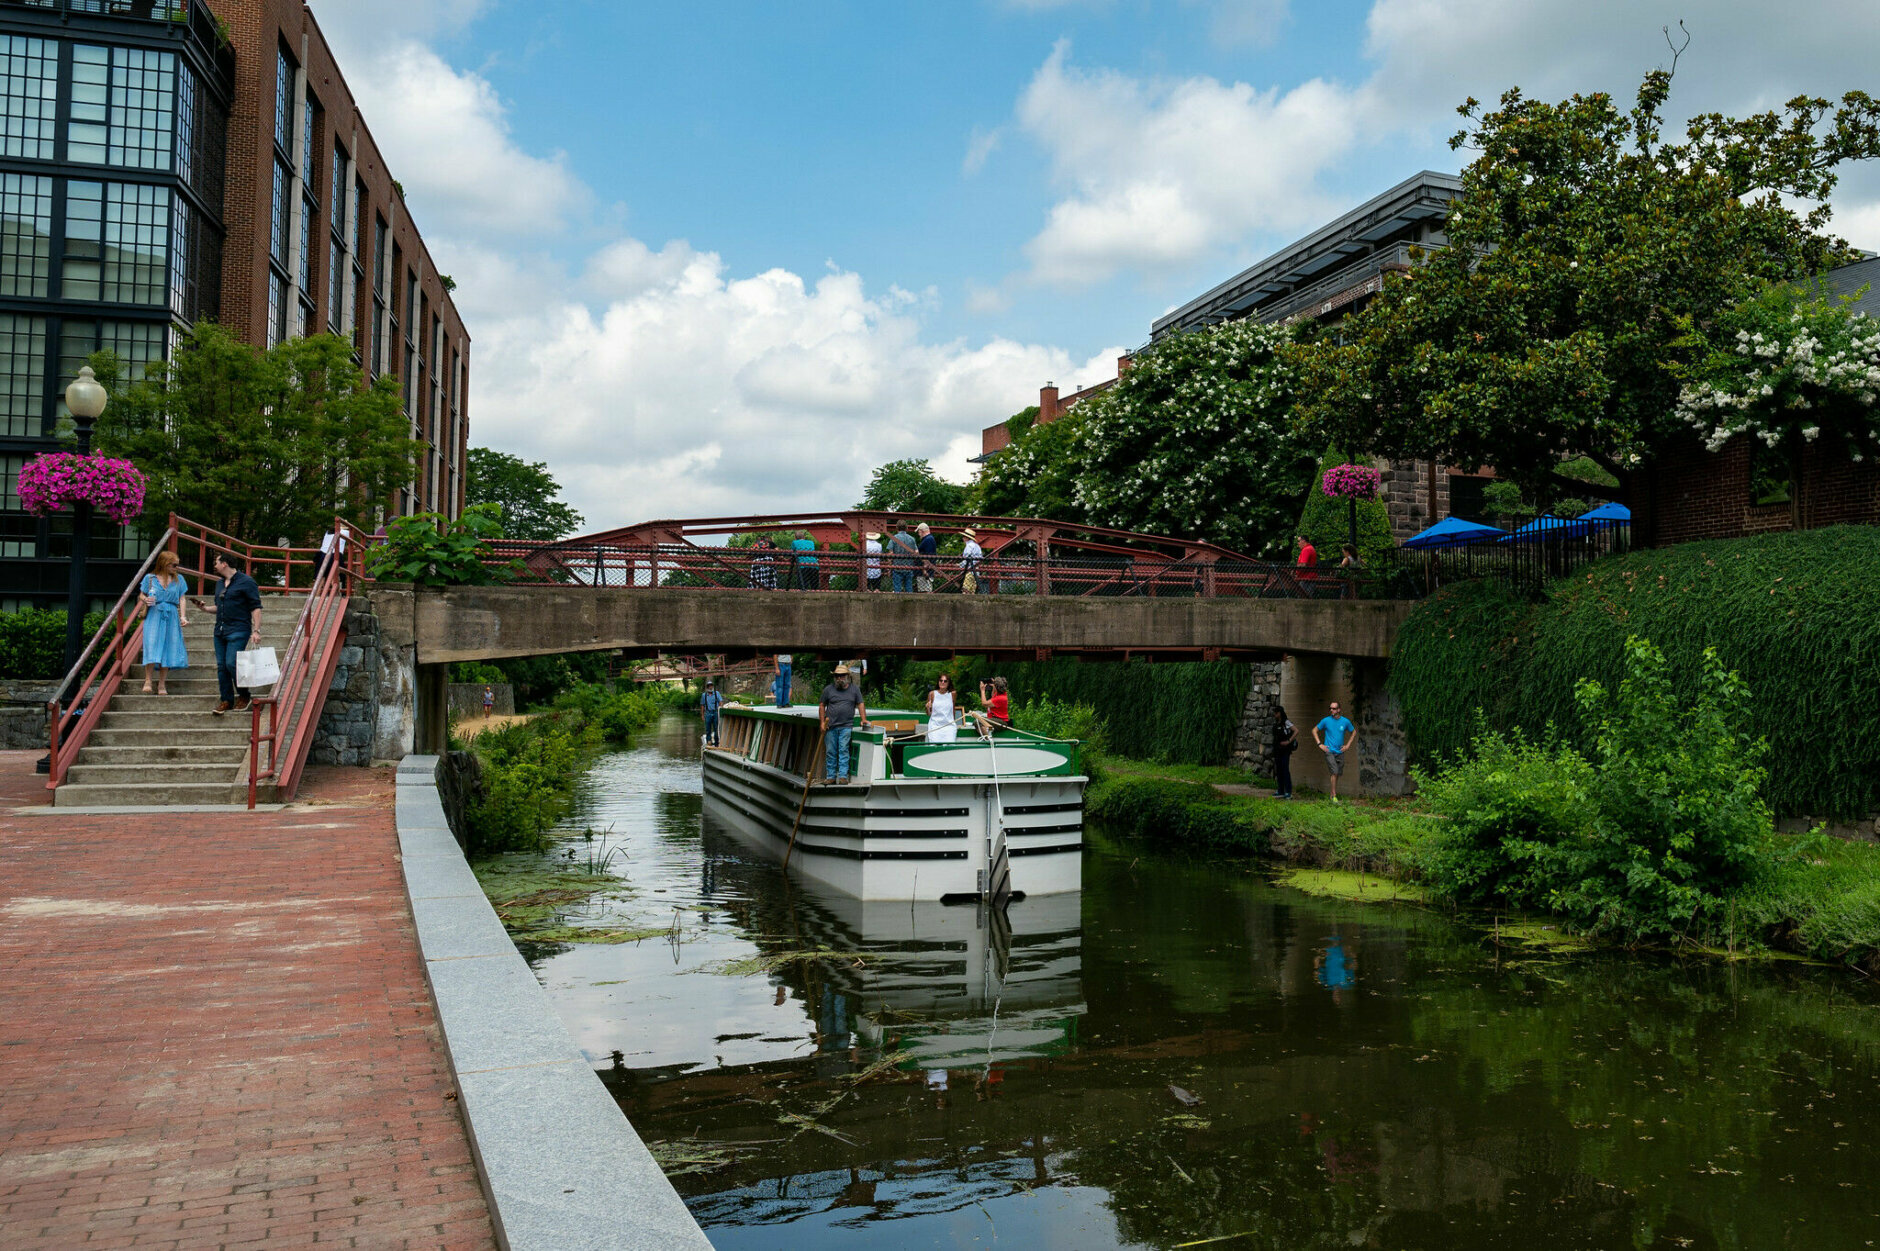 <p>So, what is the C&amp;O Canal? The C&amp;O stands for Chesapeake and Ohio, the trip the canal was meant to take boats on. The man-made waterway operated for nearly 100 years as a lifeline for communities along the Potomac River. Started in 1828, its heyday was in the 1860s.</p>
<p>“It transported coal, lumber and agricultural products,” said Christiana Hanson, chief of interpretation, education and volunteers with the C&amp;O Canal National Historical Park. “At the time it was connecting those communities with the West.”</p>
<p>At that time “The West” was defined as places like Michigan and Ohio, which is where the canal was aiming.</p>
